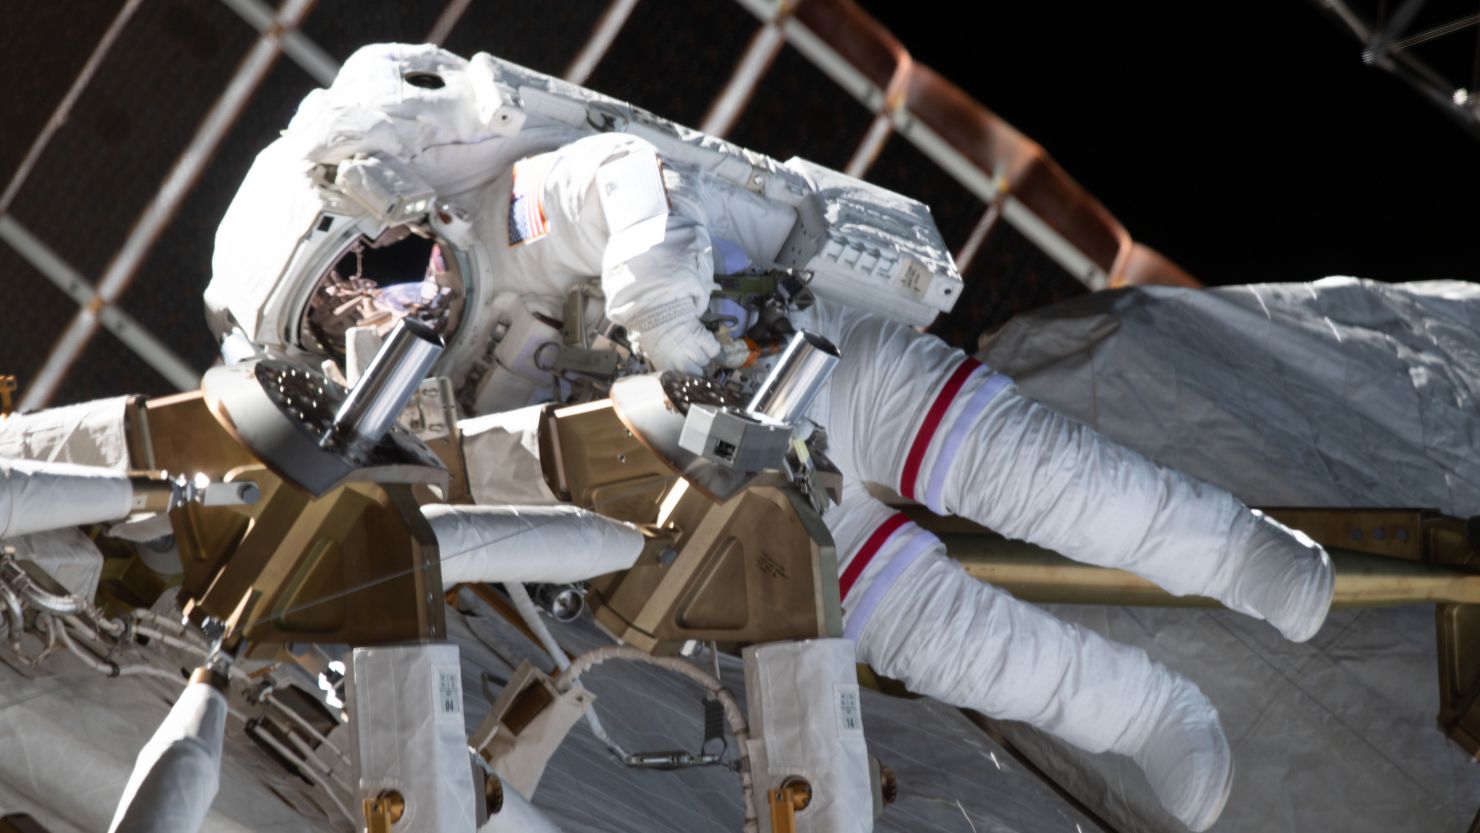  (Feb. 28, 2021) --- NASA astronaut Kate Rubins is pictured during a spacewalk to install solar array modification kits on the International Space Station. The maintenance work will support new, more powerful solar arrays that will be delivered on upcoming SpaceX Dragon cargo missions.